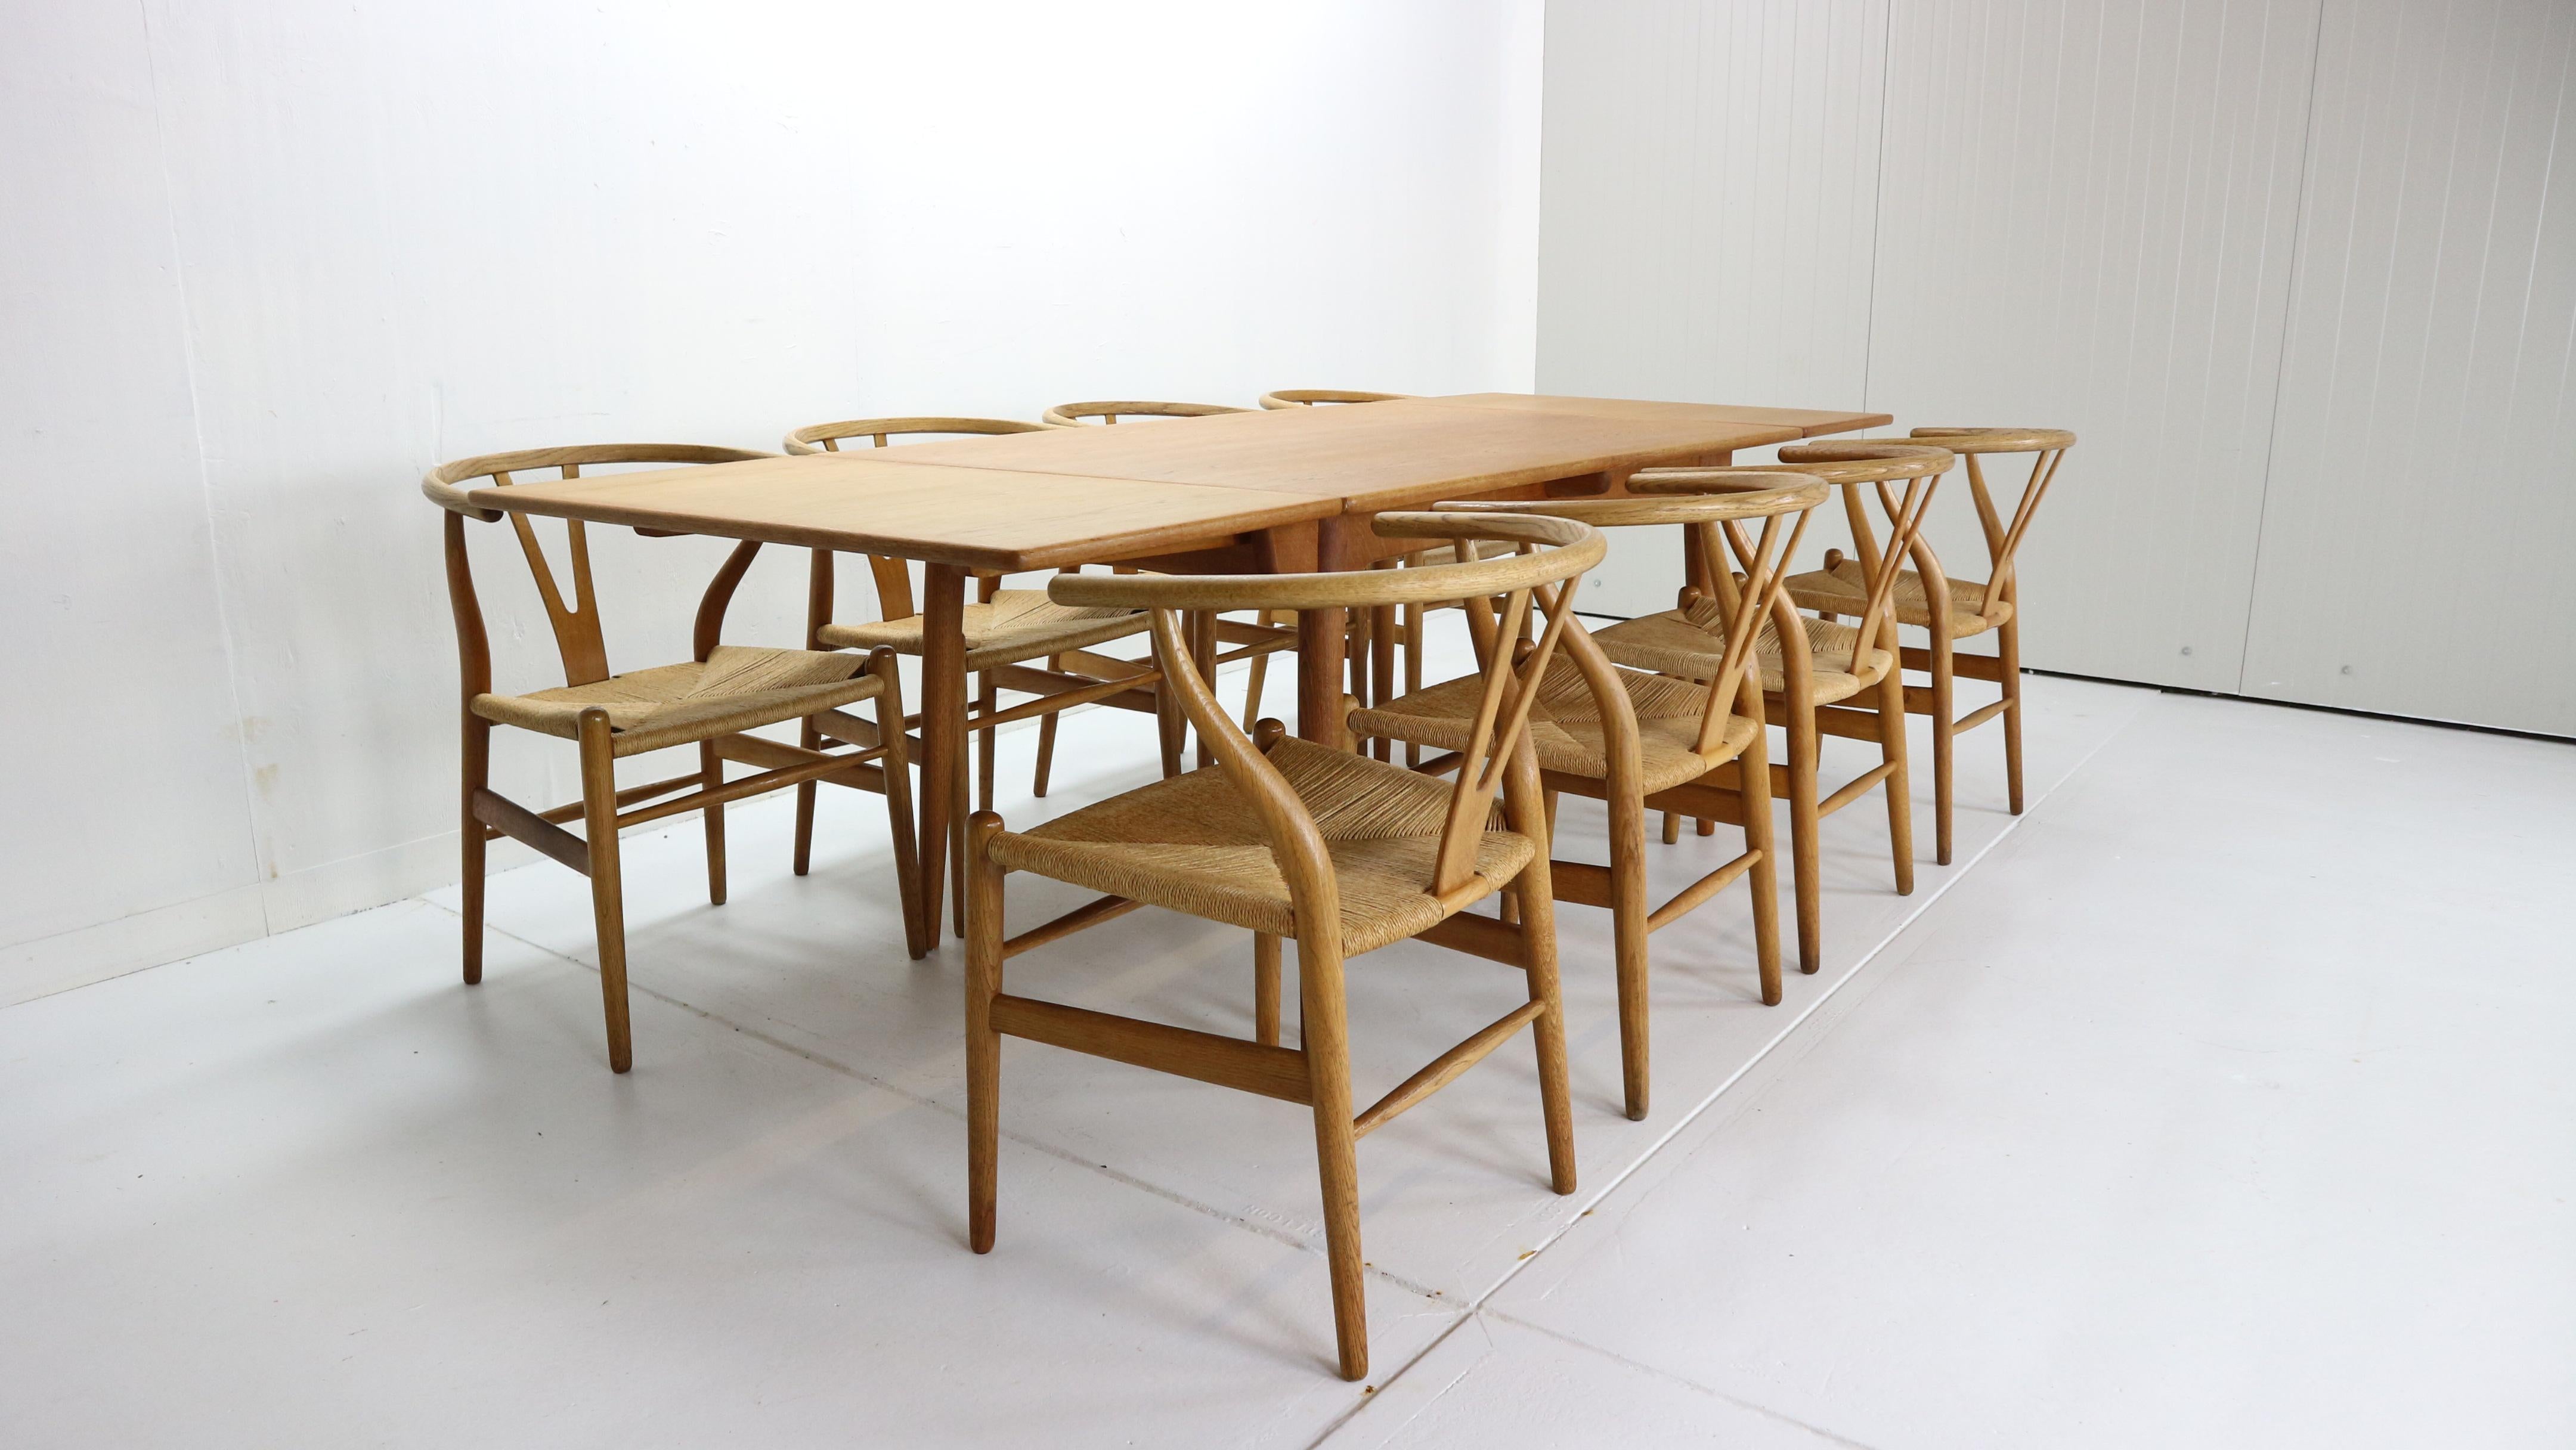 Scandinavian Modern period dinning room set (dinning table and 8 dinning chairs) designed by Hans J. Wegner in 1950s period, Denmark.

Extendable dinning room table Model no. AT-312 manufactured for Andreas Tuck. 
Made entirely of oak wood, with